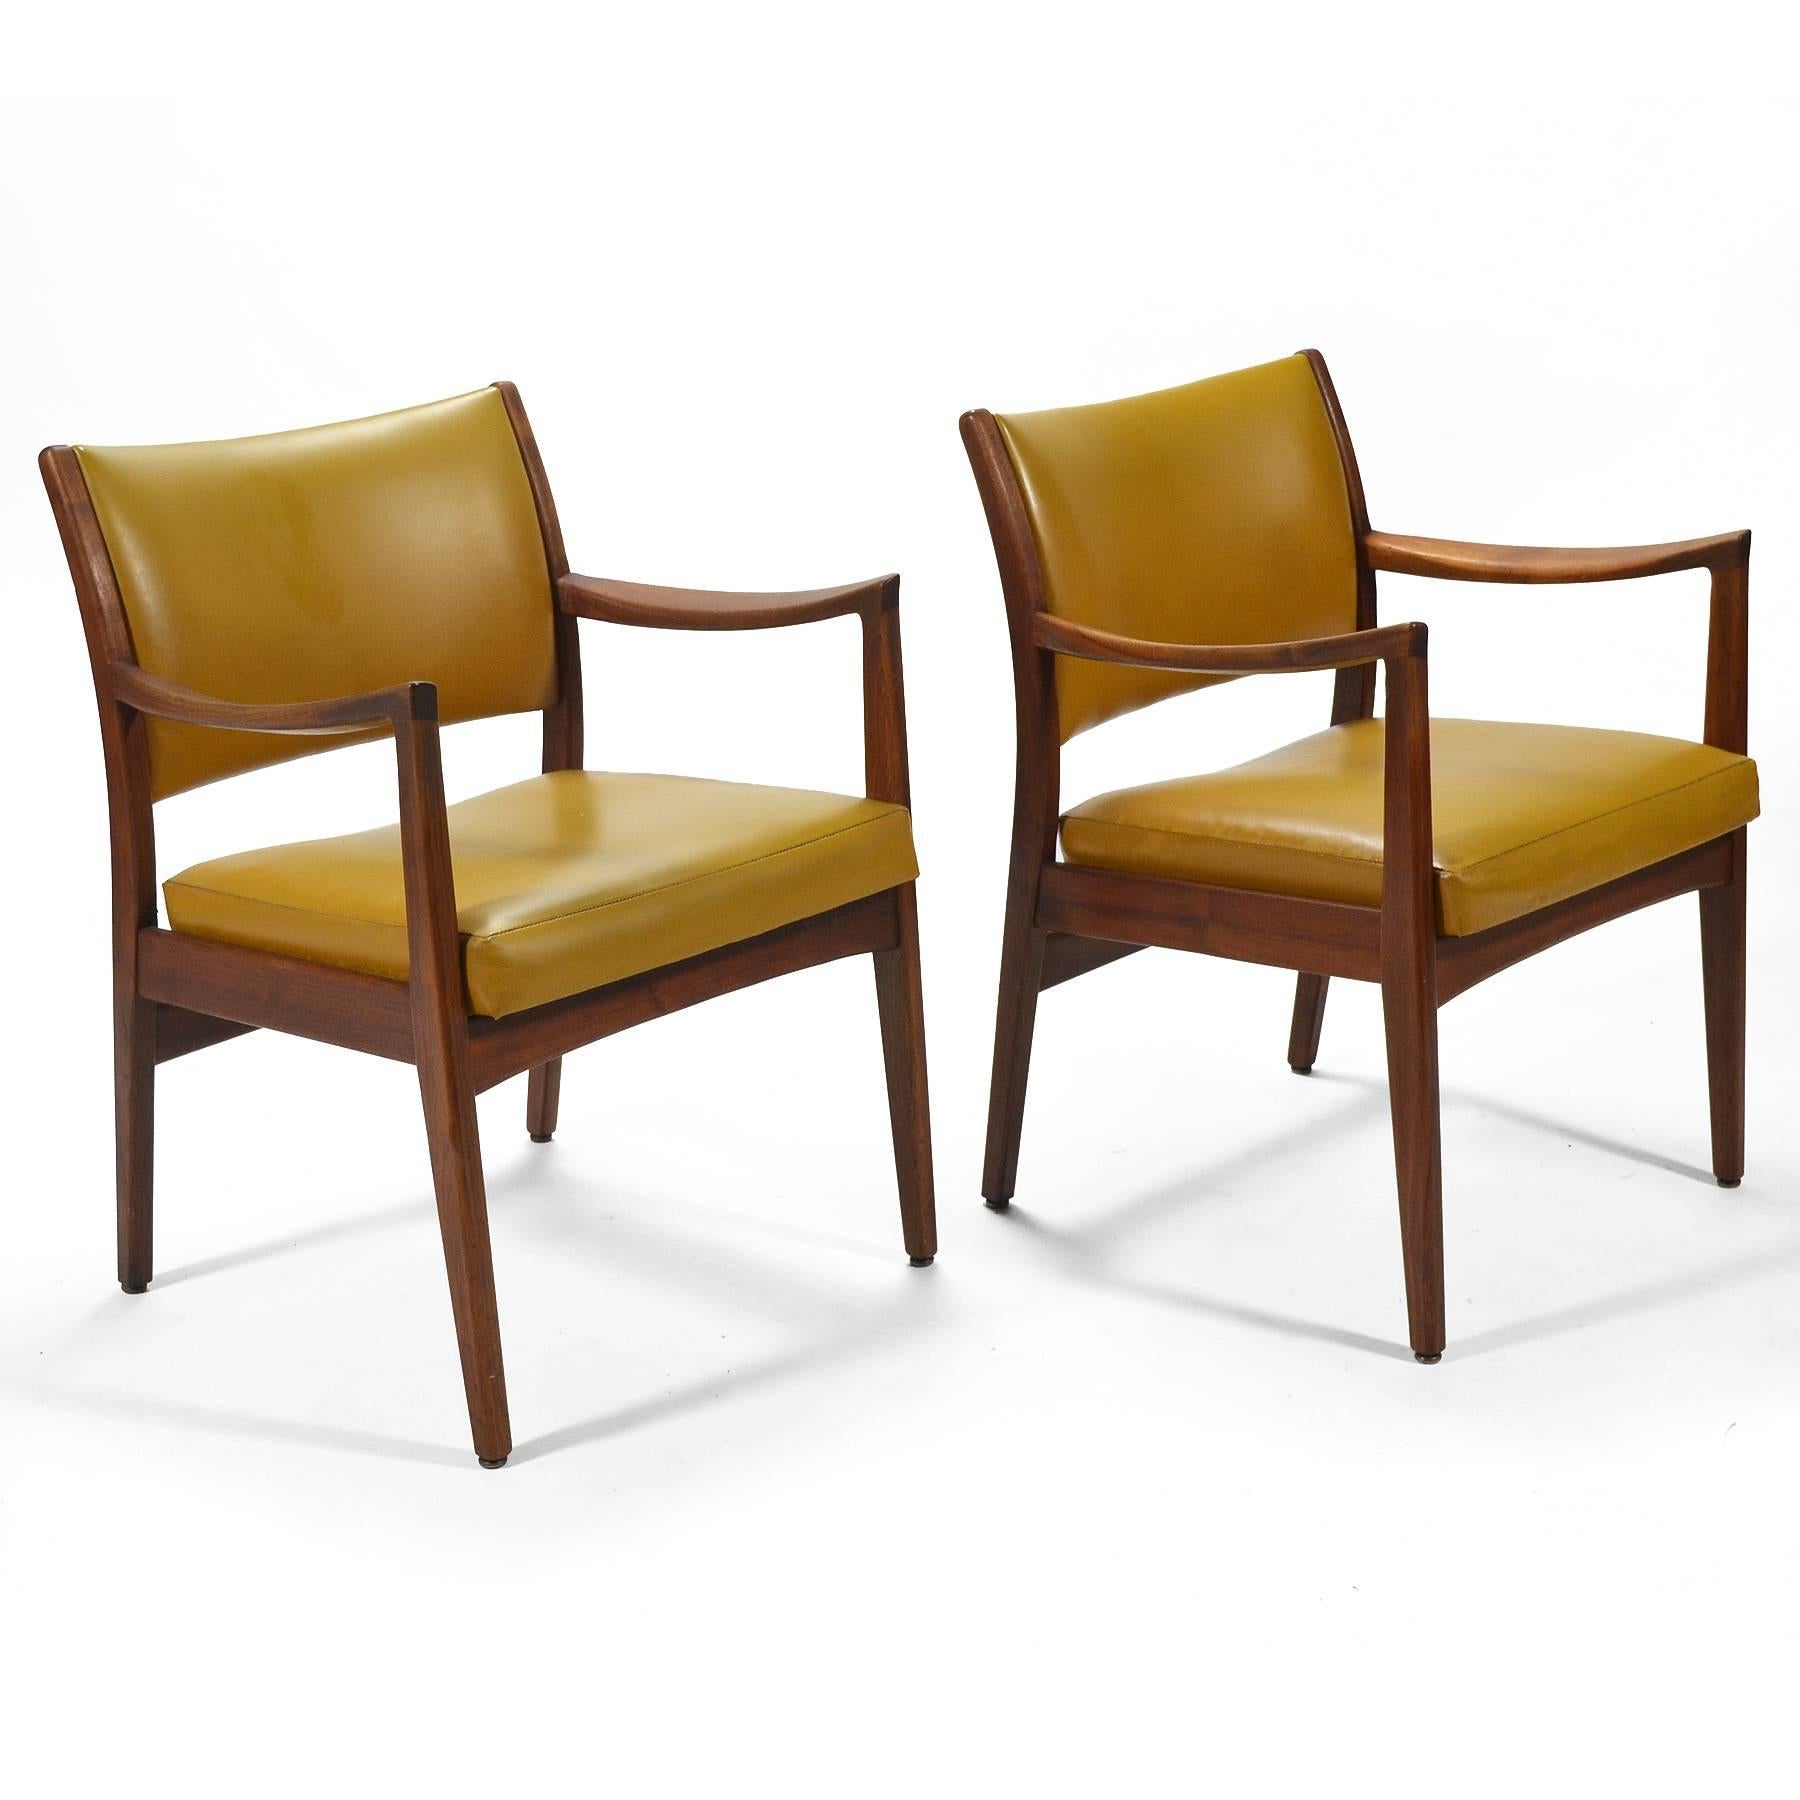 These armchairs by the Johnson Chair Company have beautiful sculpted walnut frames with very striking arms. They remind us of designs by Jens Risom and Peter Wessel and have a fantastic build quality.